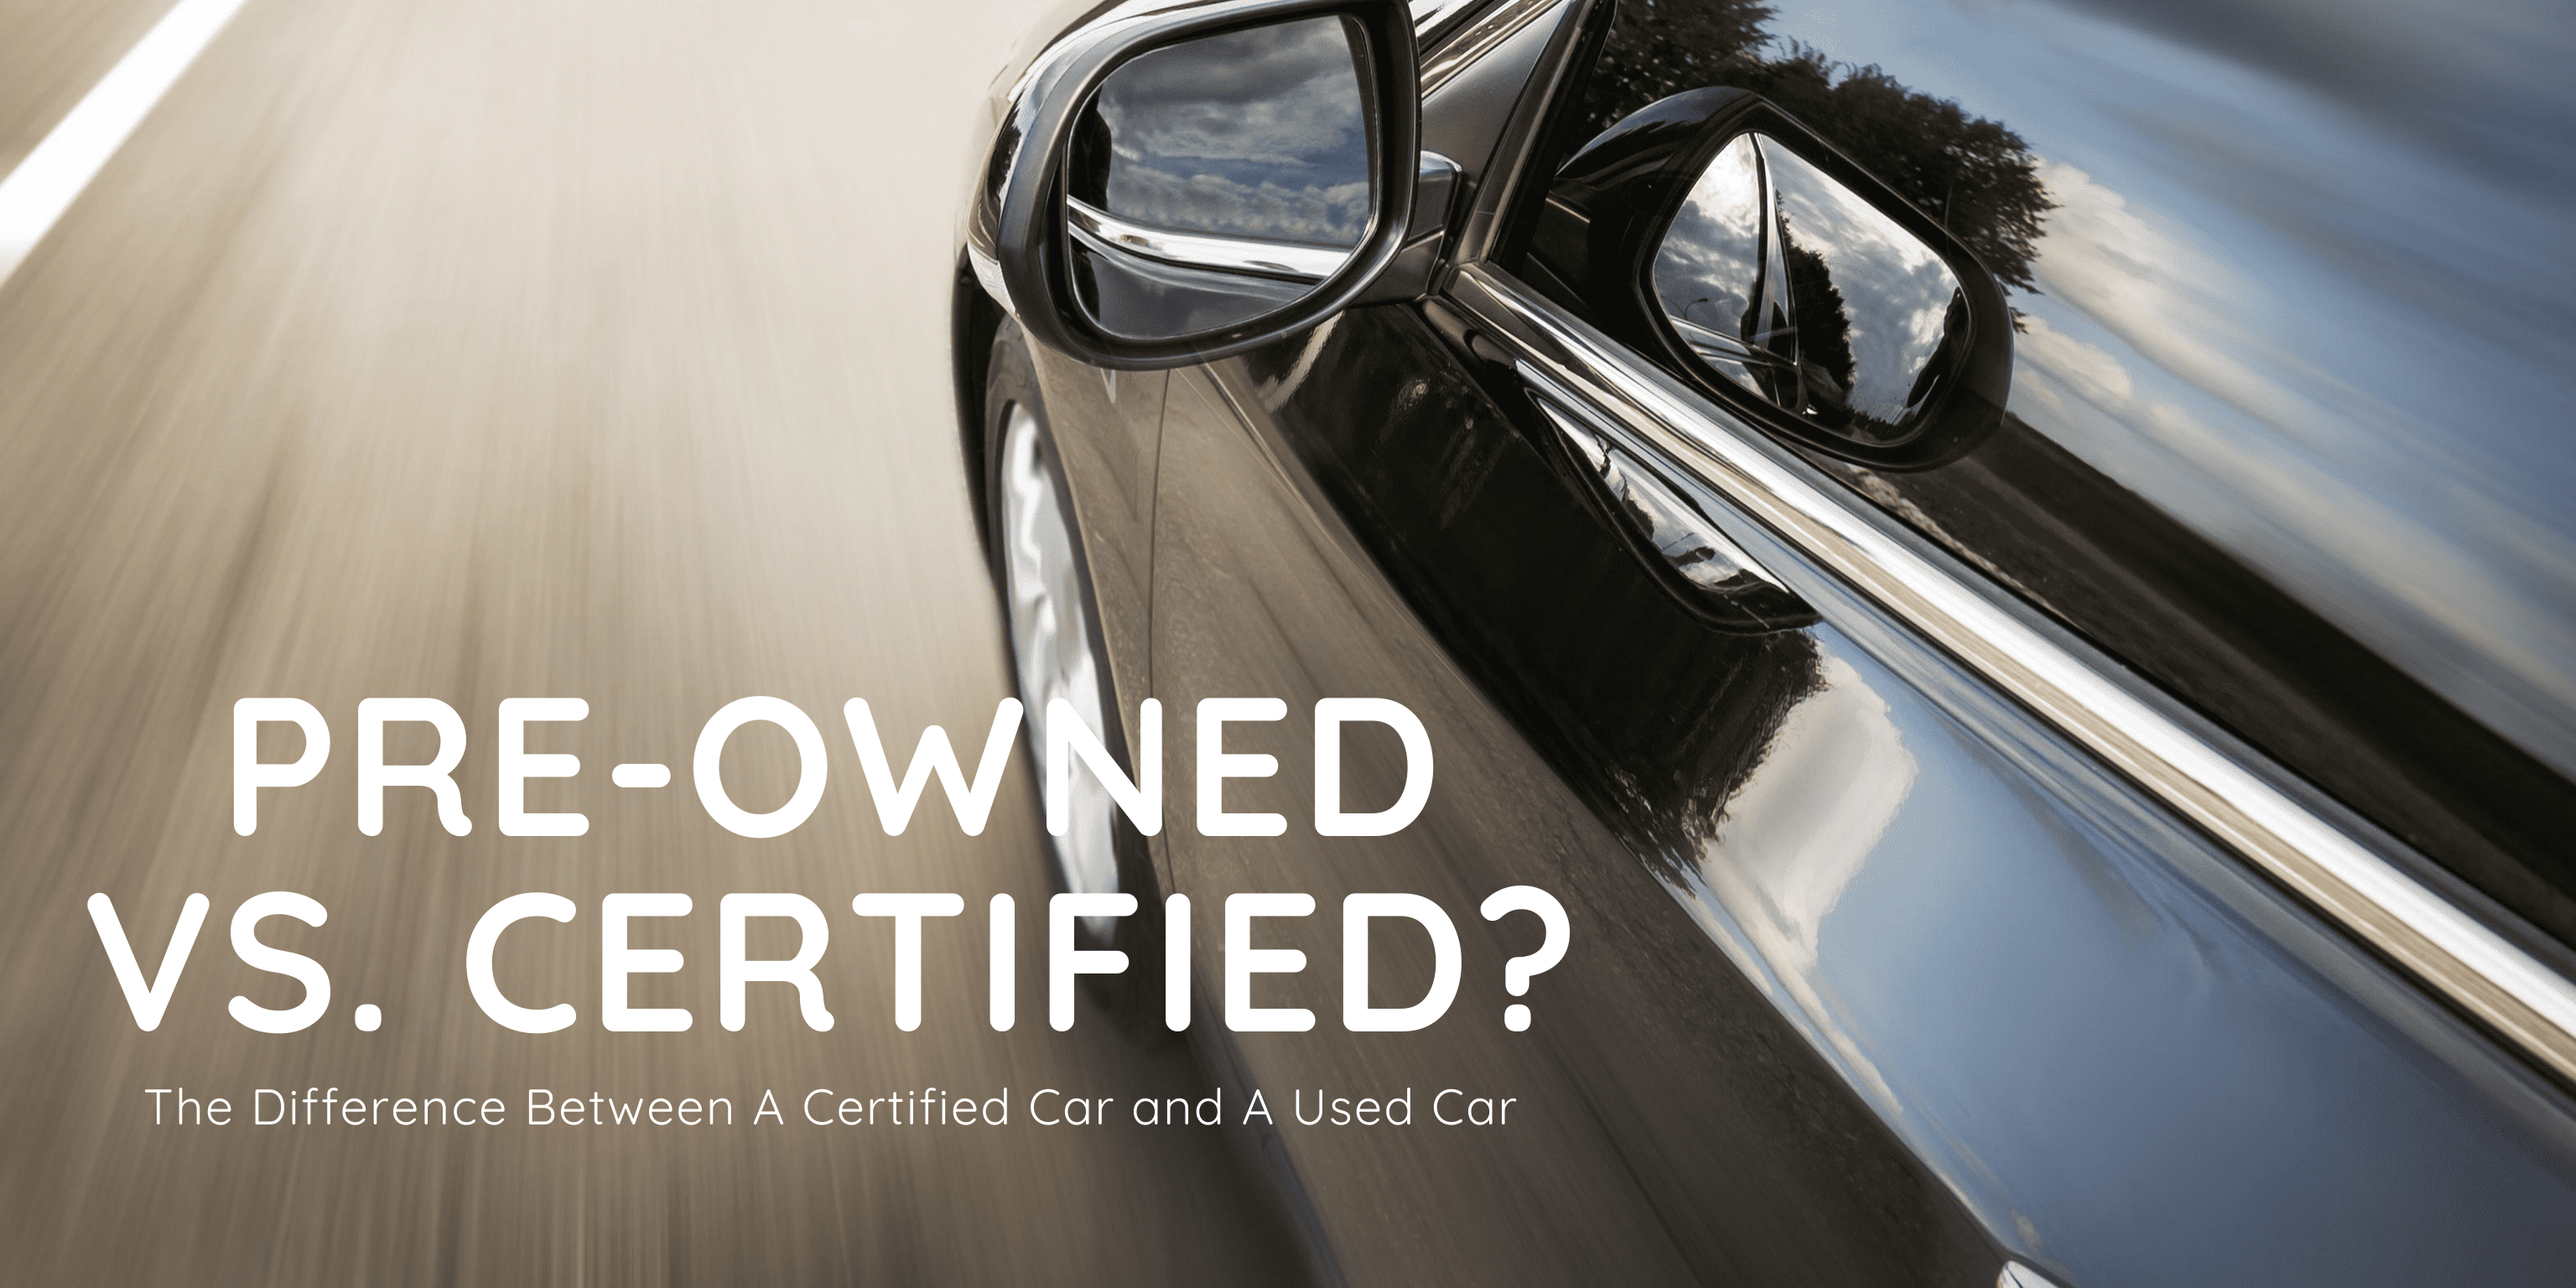 Pre-Owned vs. Certified? The Difference Between A Certified Car and A Used Car